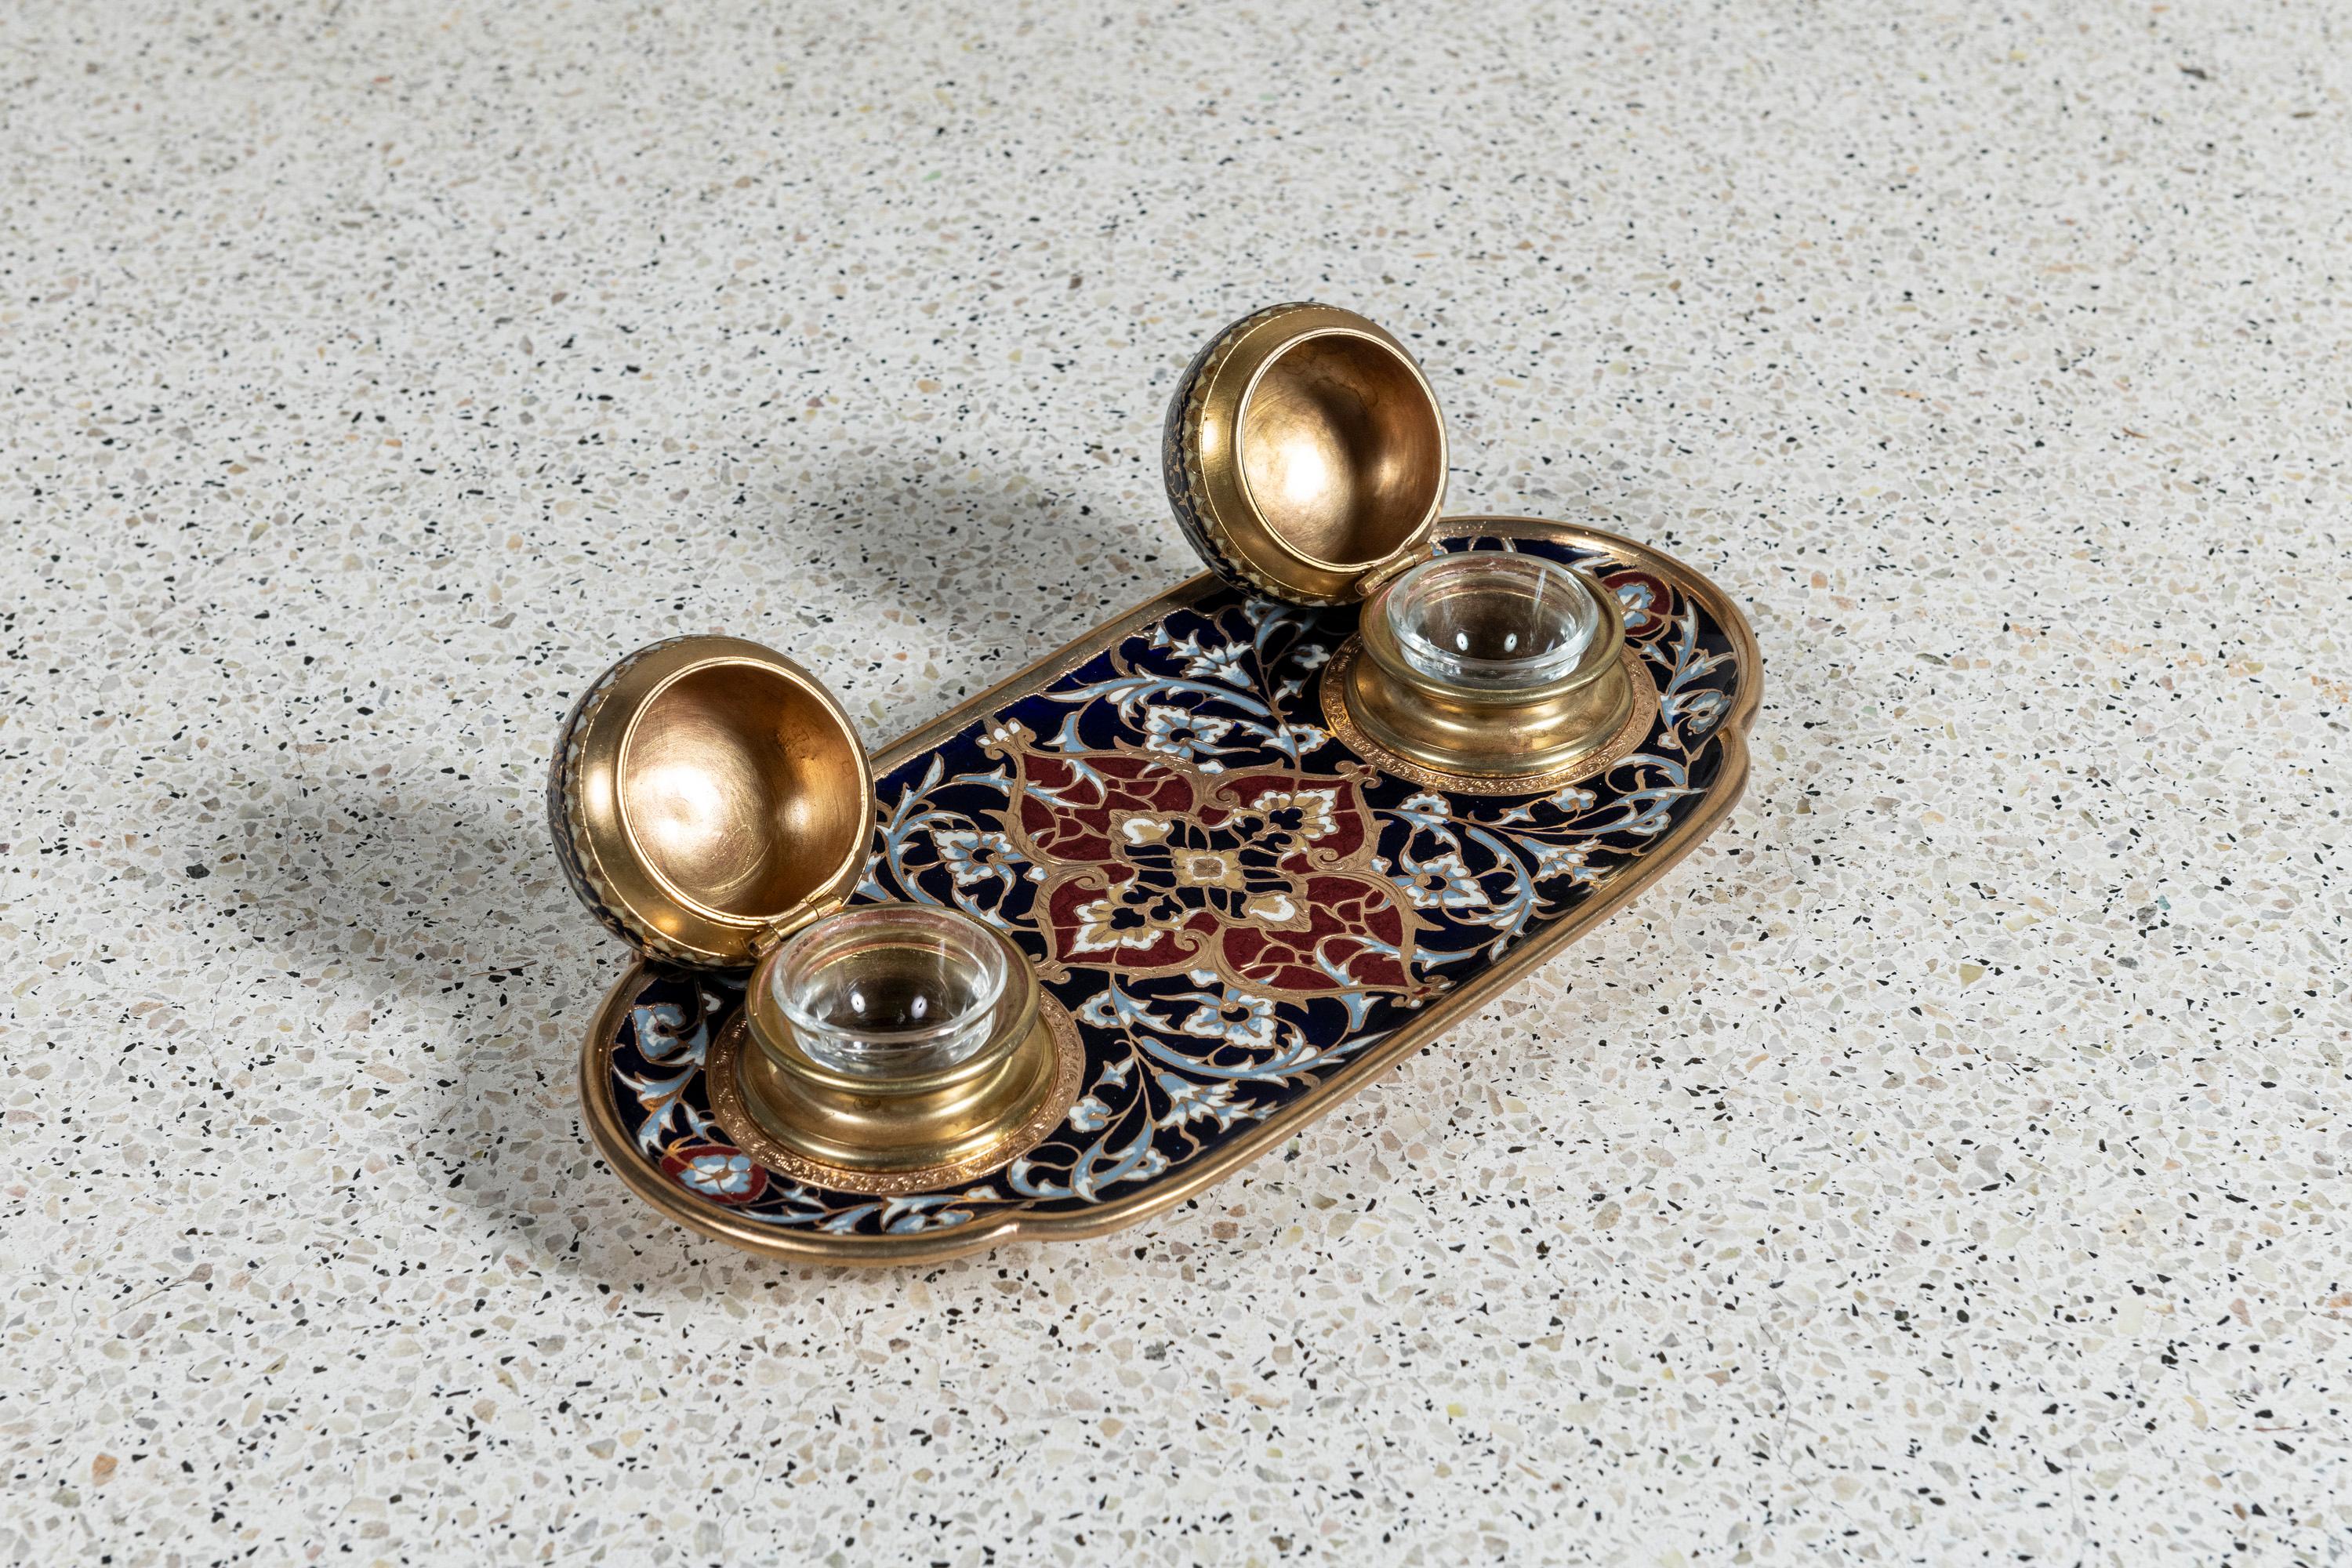 French Enamel cloissoné and gilt bronze inkwell. France, late 19th century. For Sale